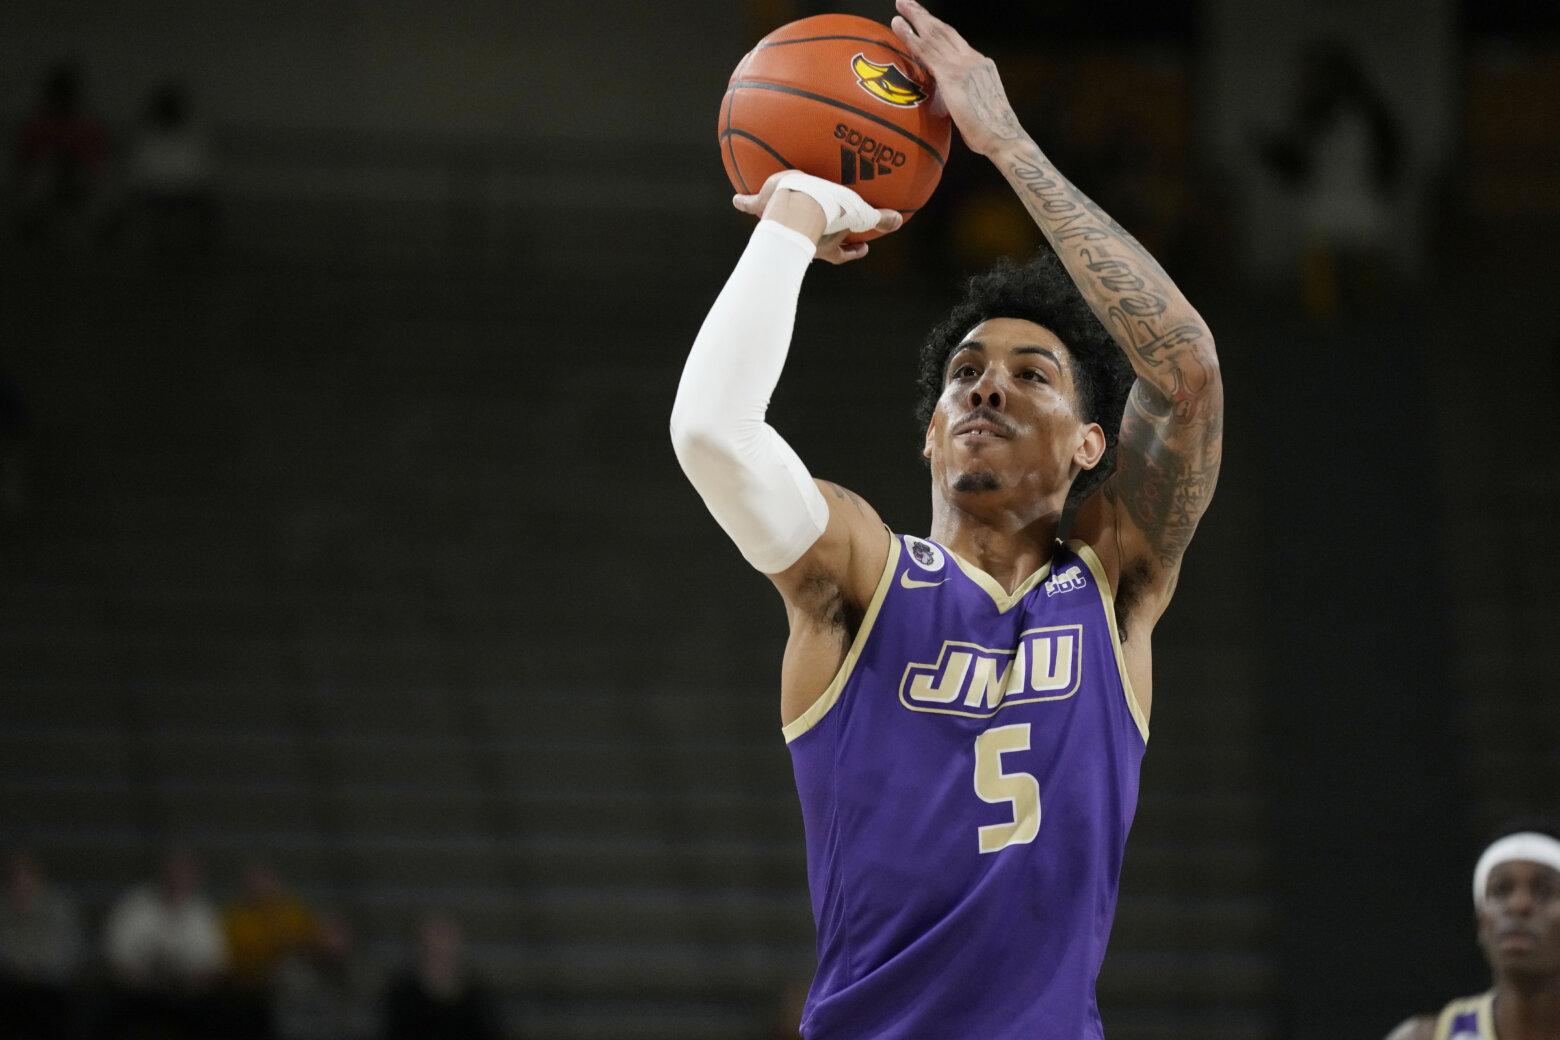 <h3>James Madison Dukes</h3>
<p>The Dukes are returning to &#8220;the big dance&#8221; with the No. 12 seed for the NCAA Tournament after a record-setting win against Arkansas State in the Sun Belt Conference on March 11.</p>
<p>James Madison will face Wisconson (No. 5) in Brooklyn, New York, in the first round after missing a championship draw for more than a decade.</p>
<p>The team&#8217;s last conference win was in 2013.</p>
